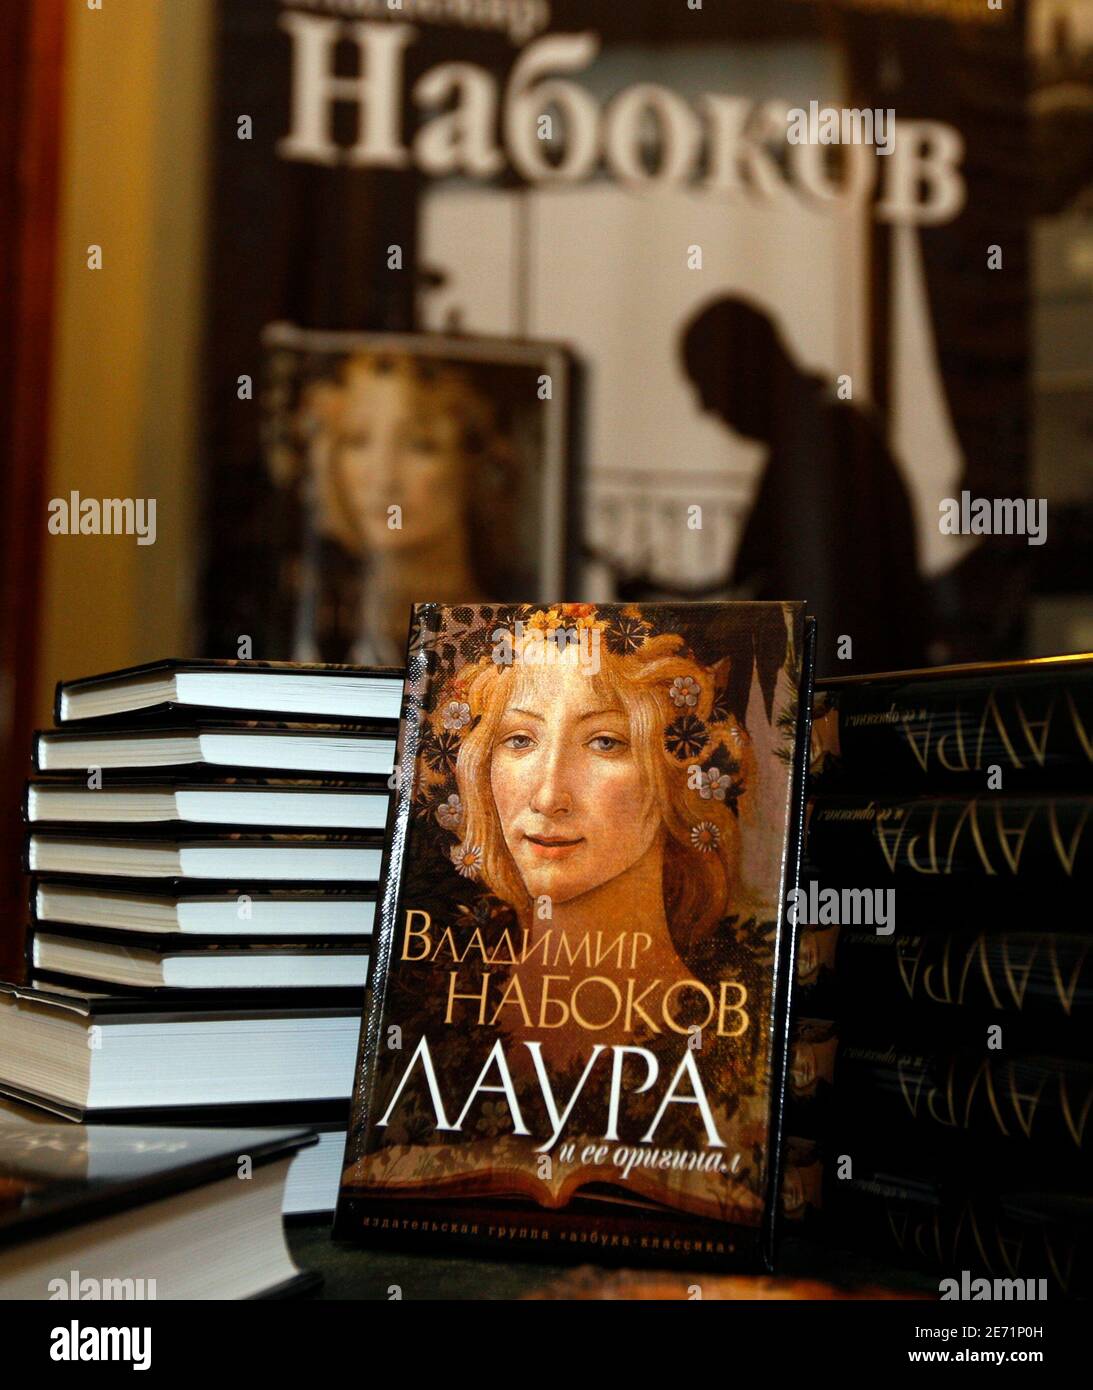 The novel 'The Original of Laura' by Vladimir Nabokov is presented at Nabokov's museum in St. Petersburg, November 30, 2009. Fifty thousand copies were printed for sale in Russia's bookstores starting Monday, according to representatives of the publishing house.  Nabokov made it clear before he died that he did not want his notes for his unfinished final novel published as he wanted them burned. But his only child, Dmitri Nabokov, decided to publish it 32 years after his father's death.  REUTERS/Alexander Demianchuk (RUSSIA SOCIETY MEDIA) Stock Photo